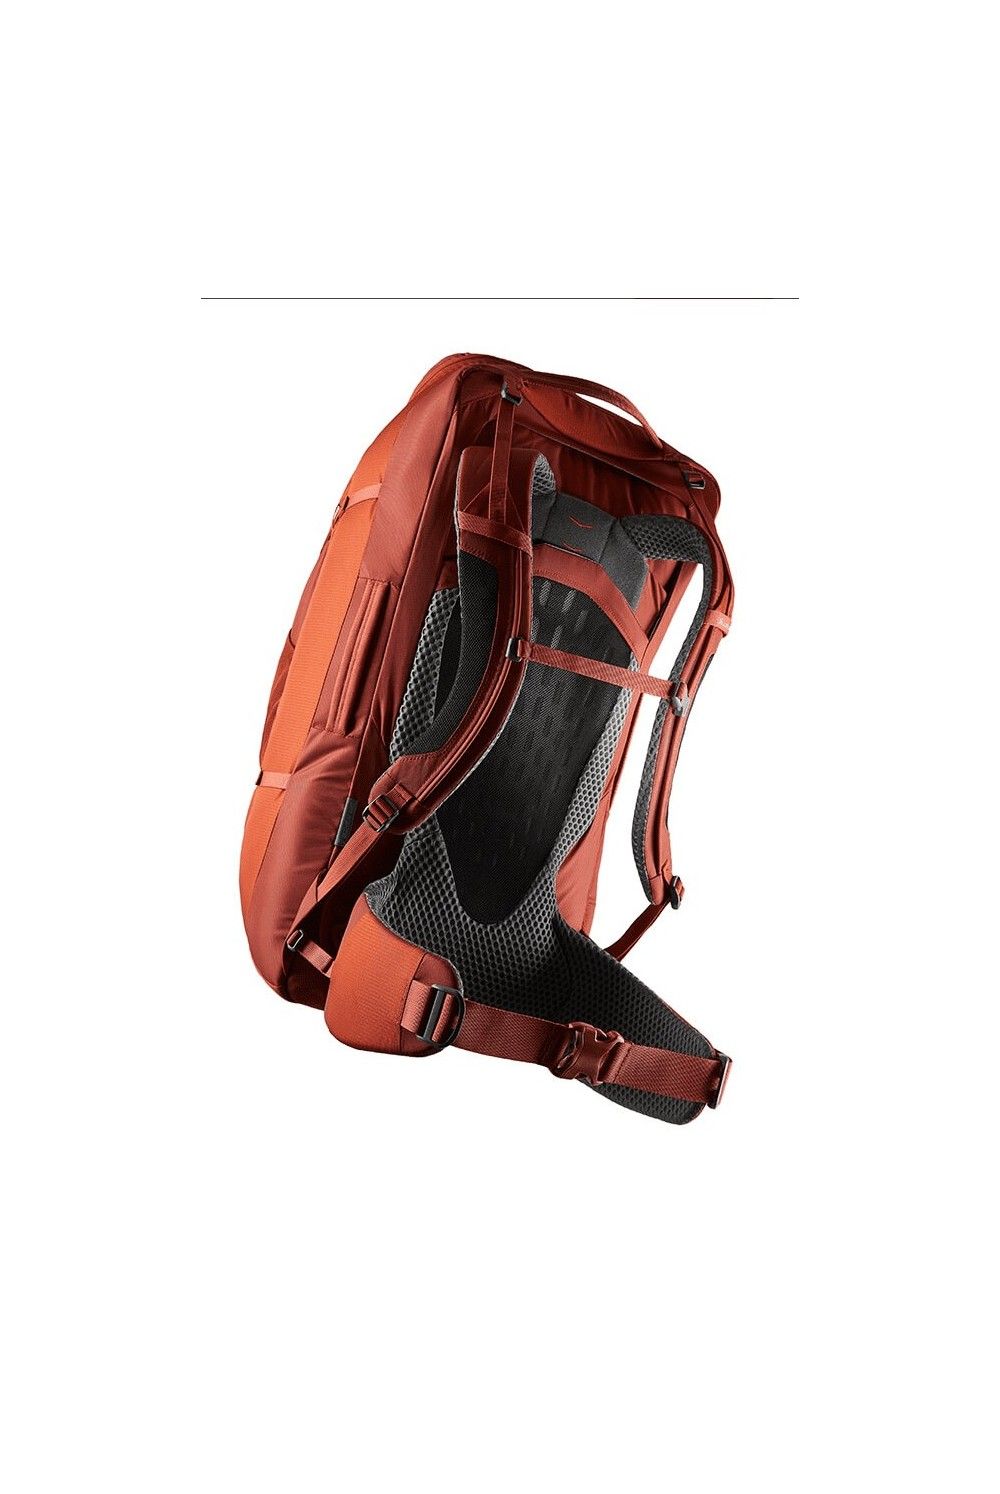 Gregory Tetrad travel backpack 60 liters